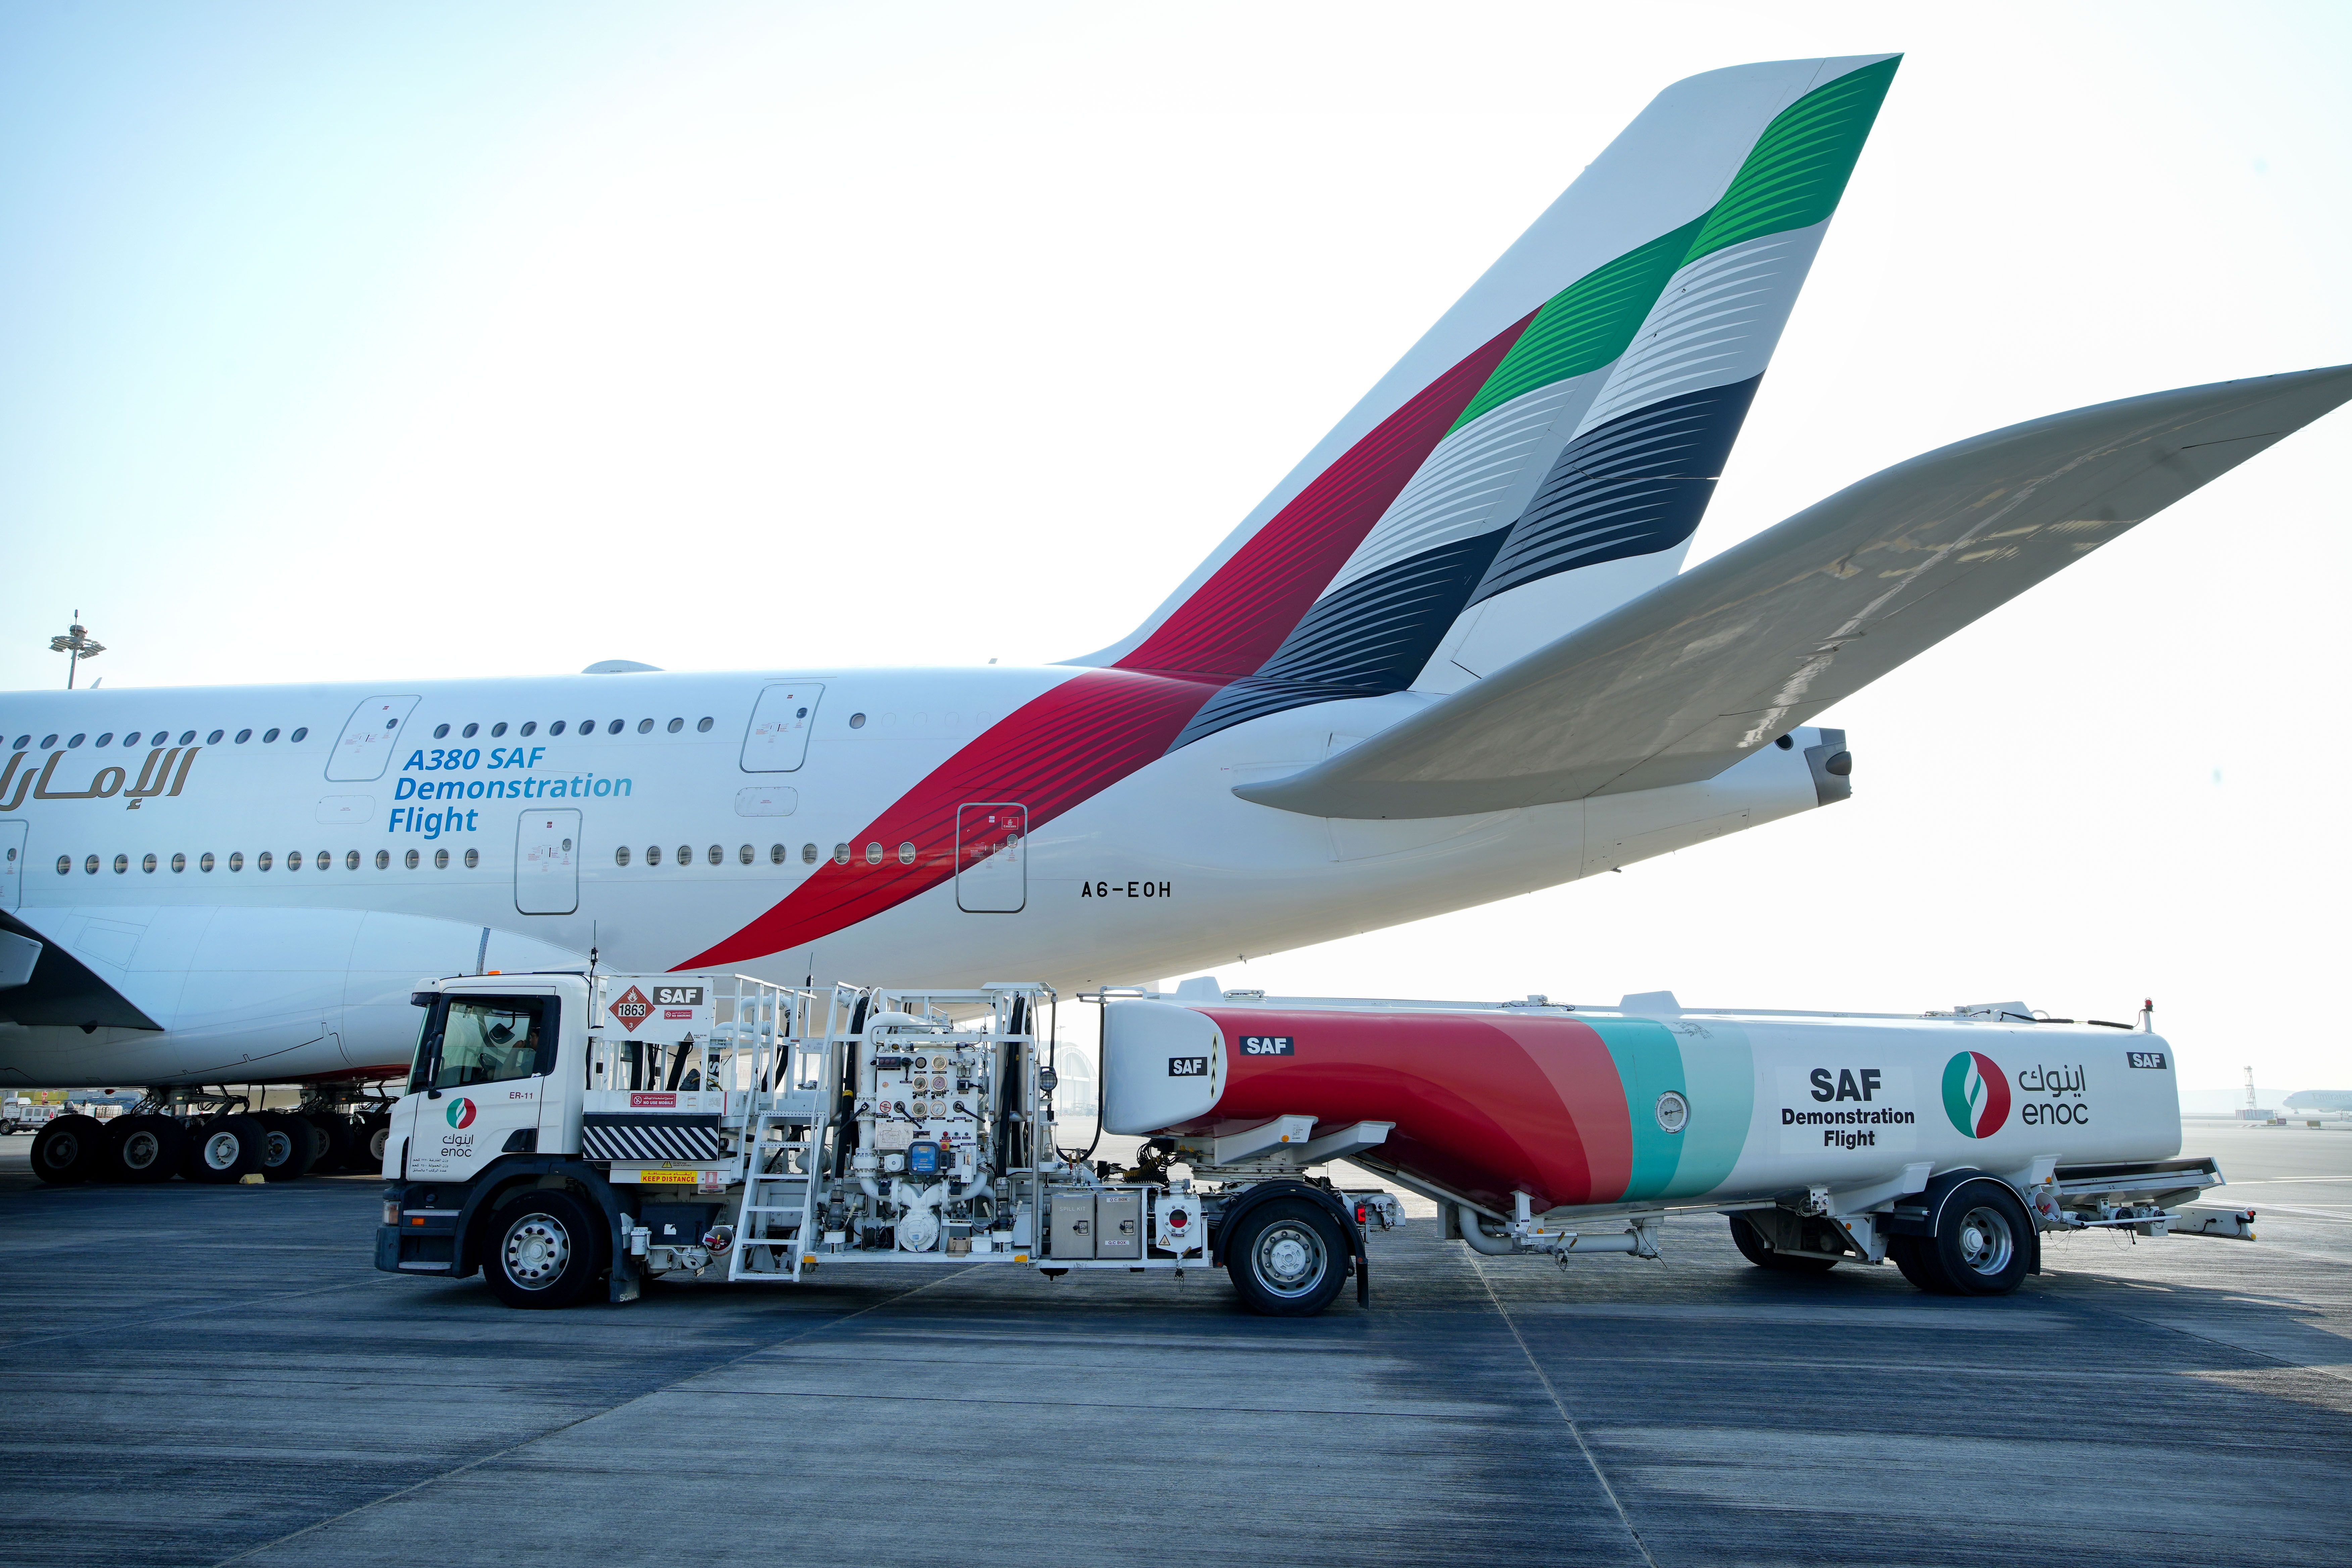 Emirates Airbus A380 being refueled with SAF